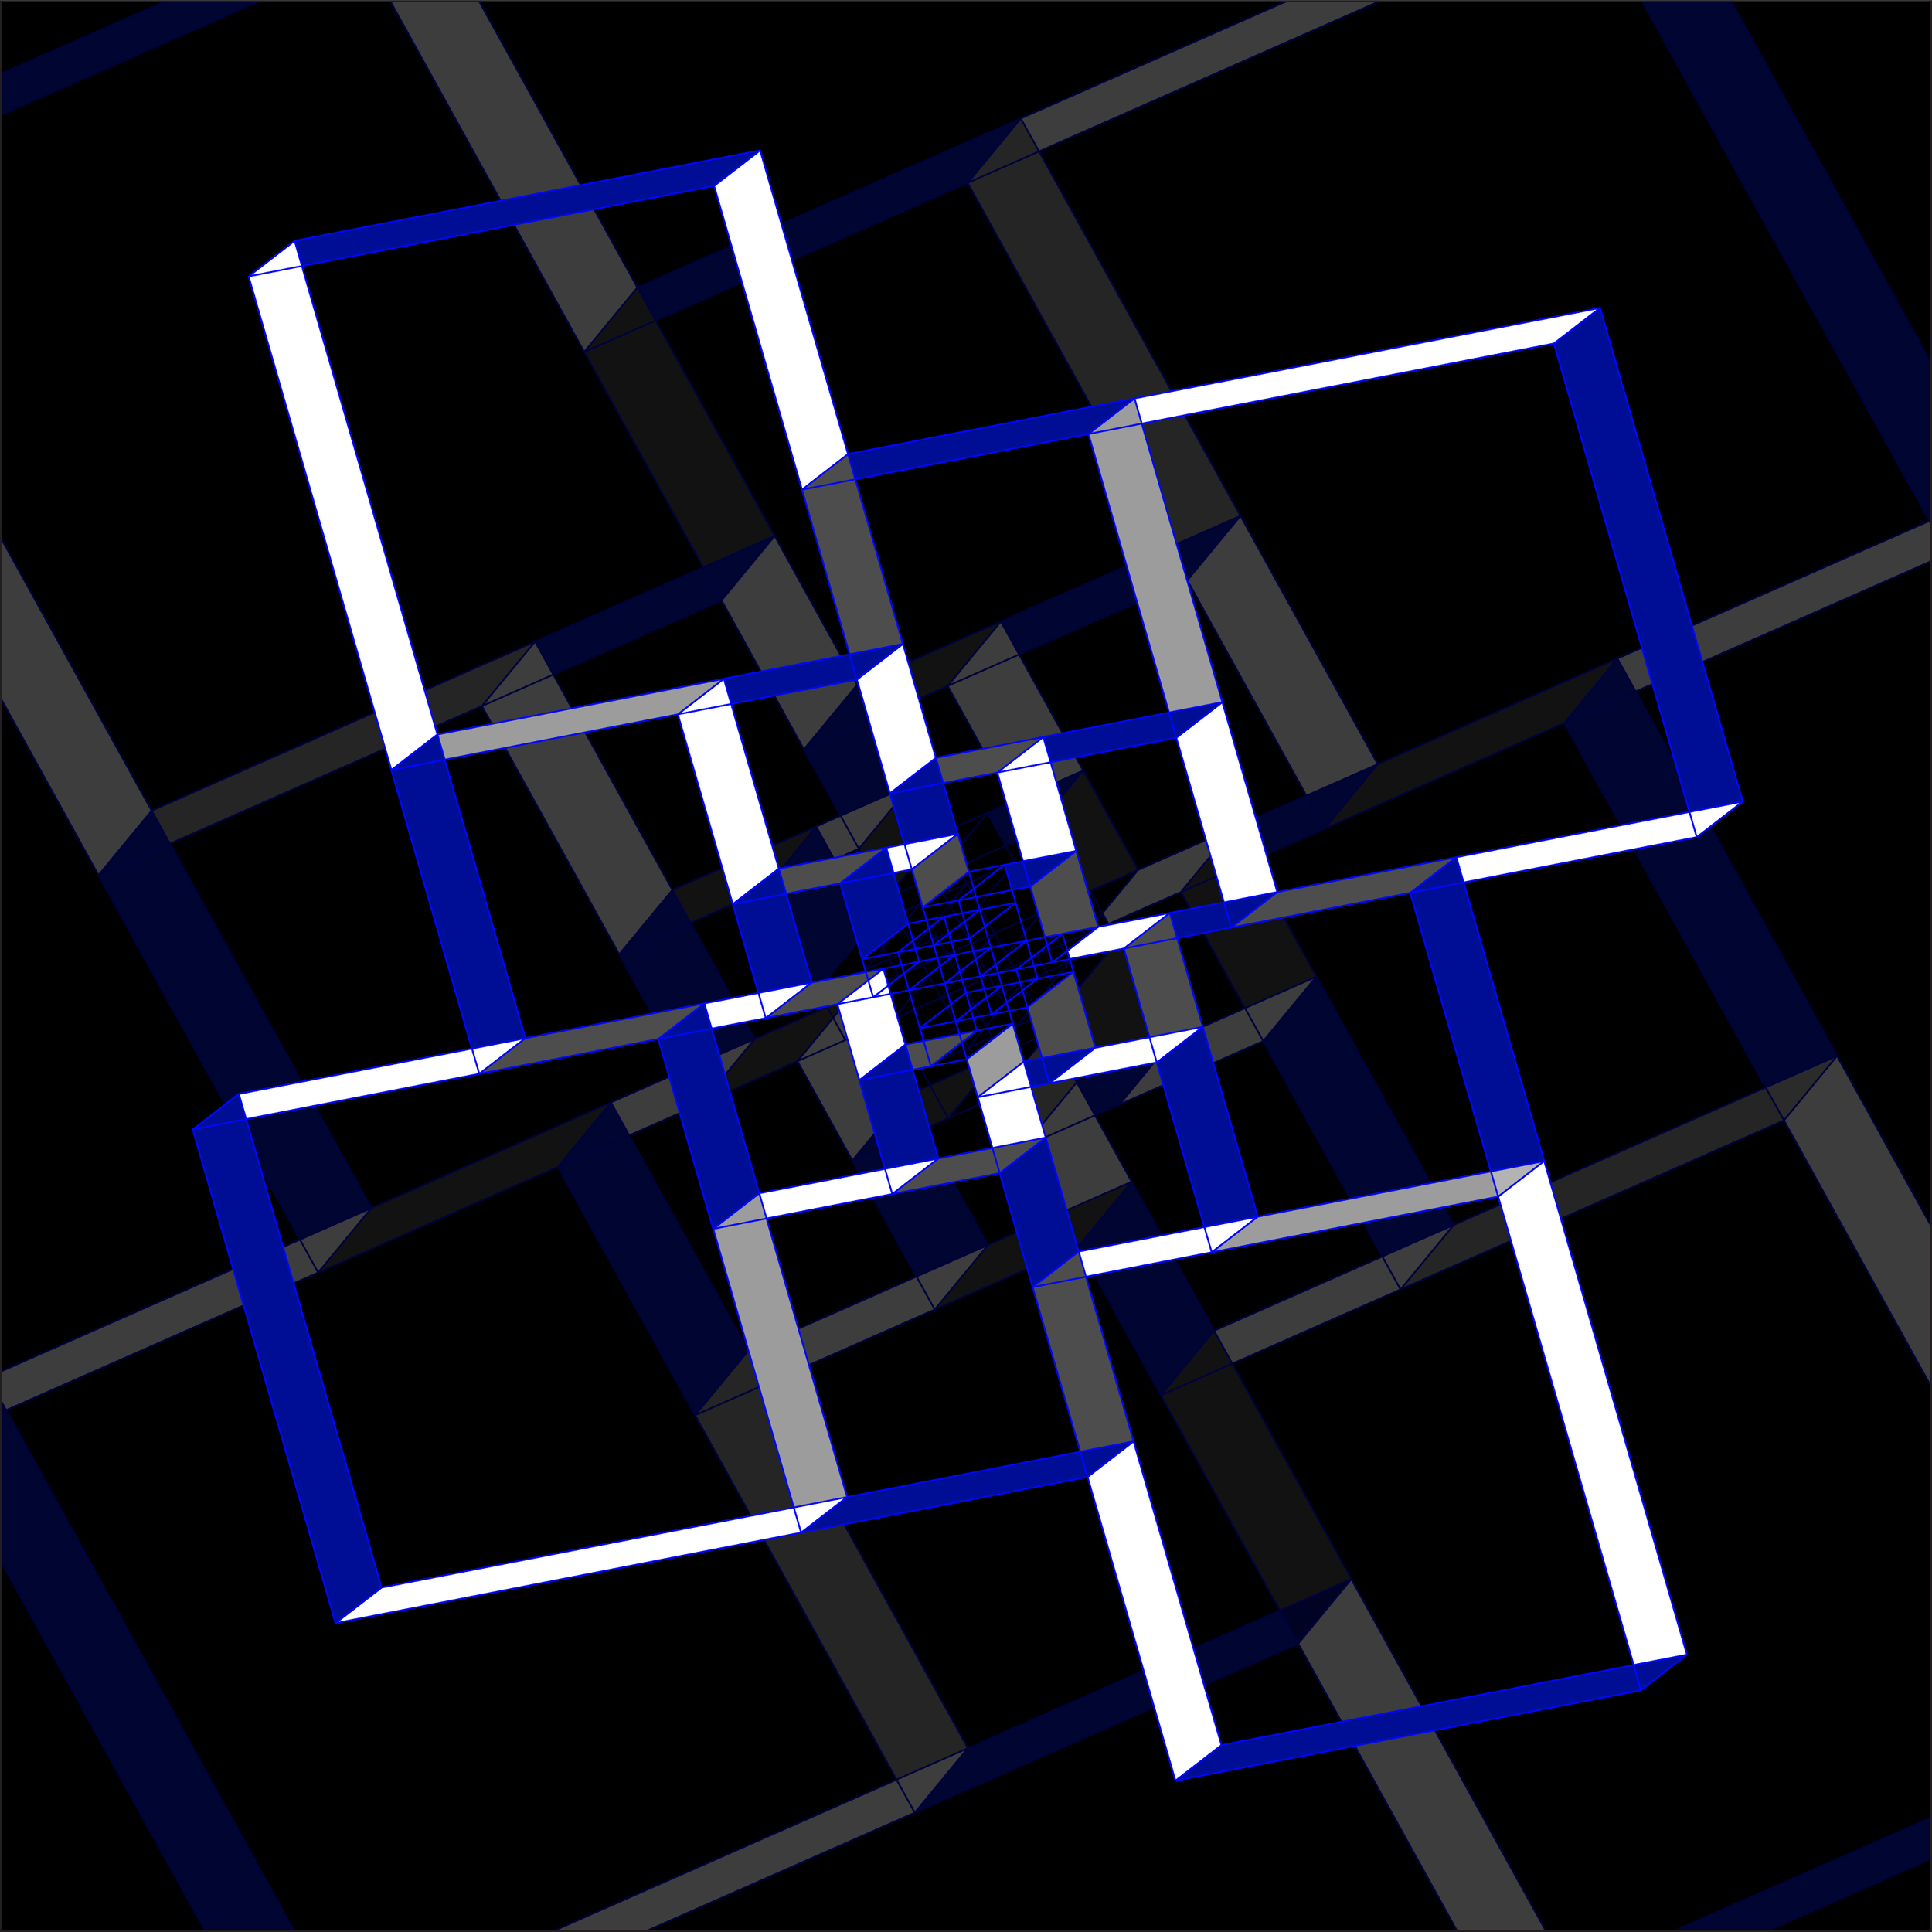 20201114_spiral-square-raster_in-42x42u_out-48x48_16x16_space_2021.06-h_120x120cm_shadow-lines.png